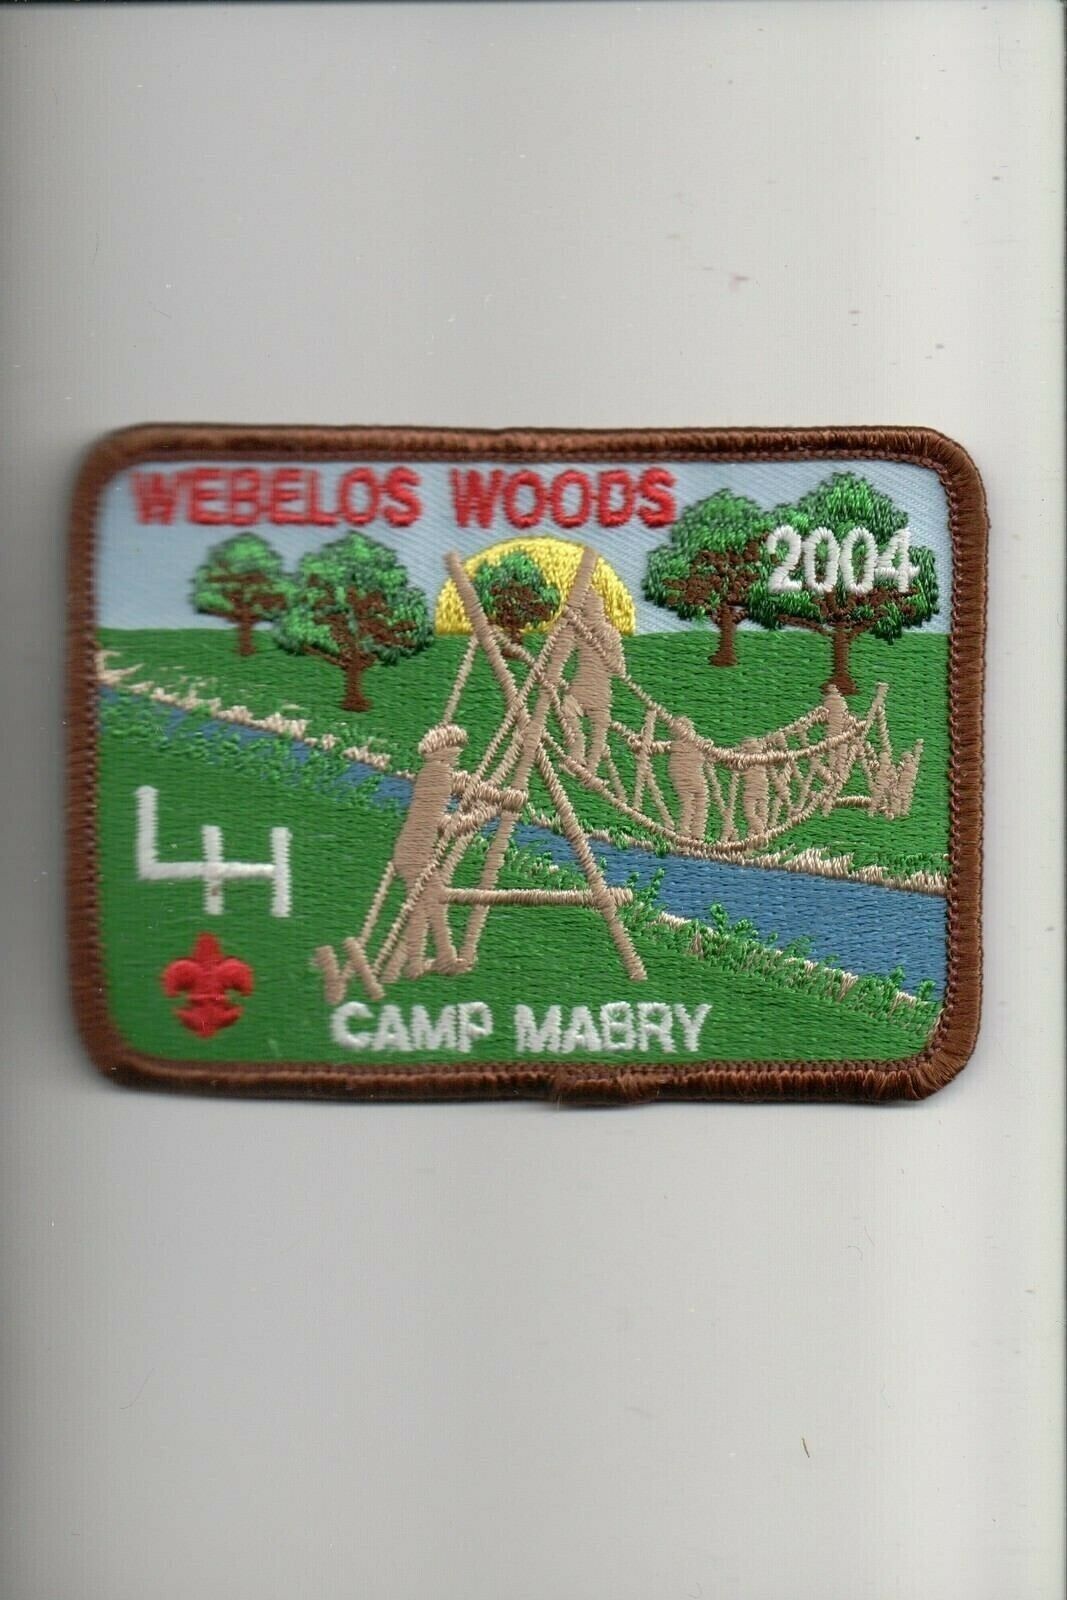 2004 Camp Mabry Webelos Woods patch